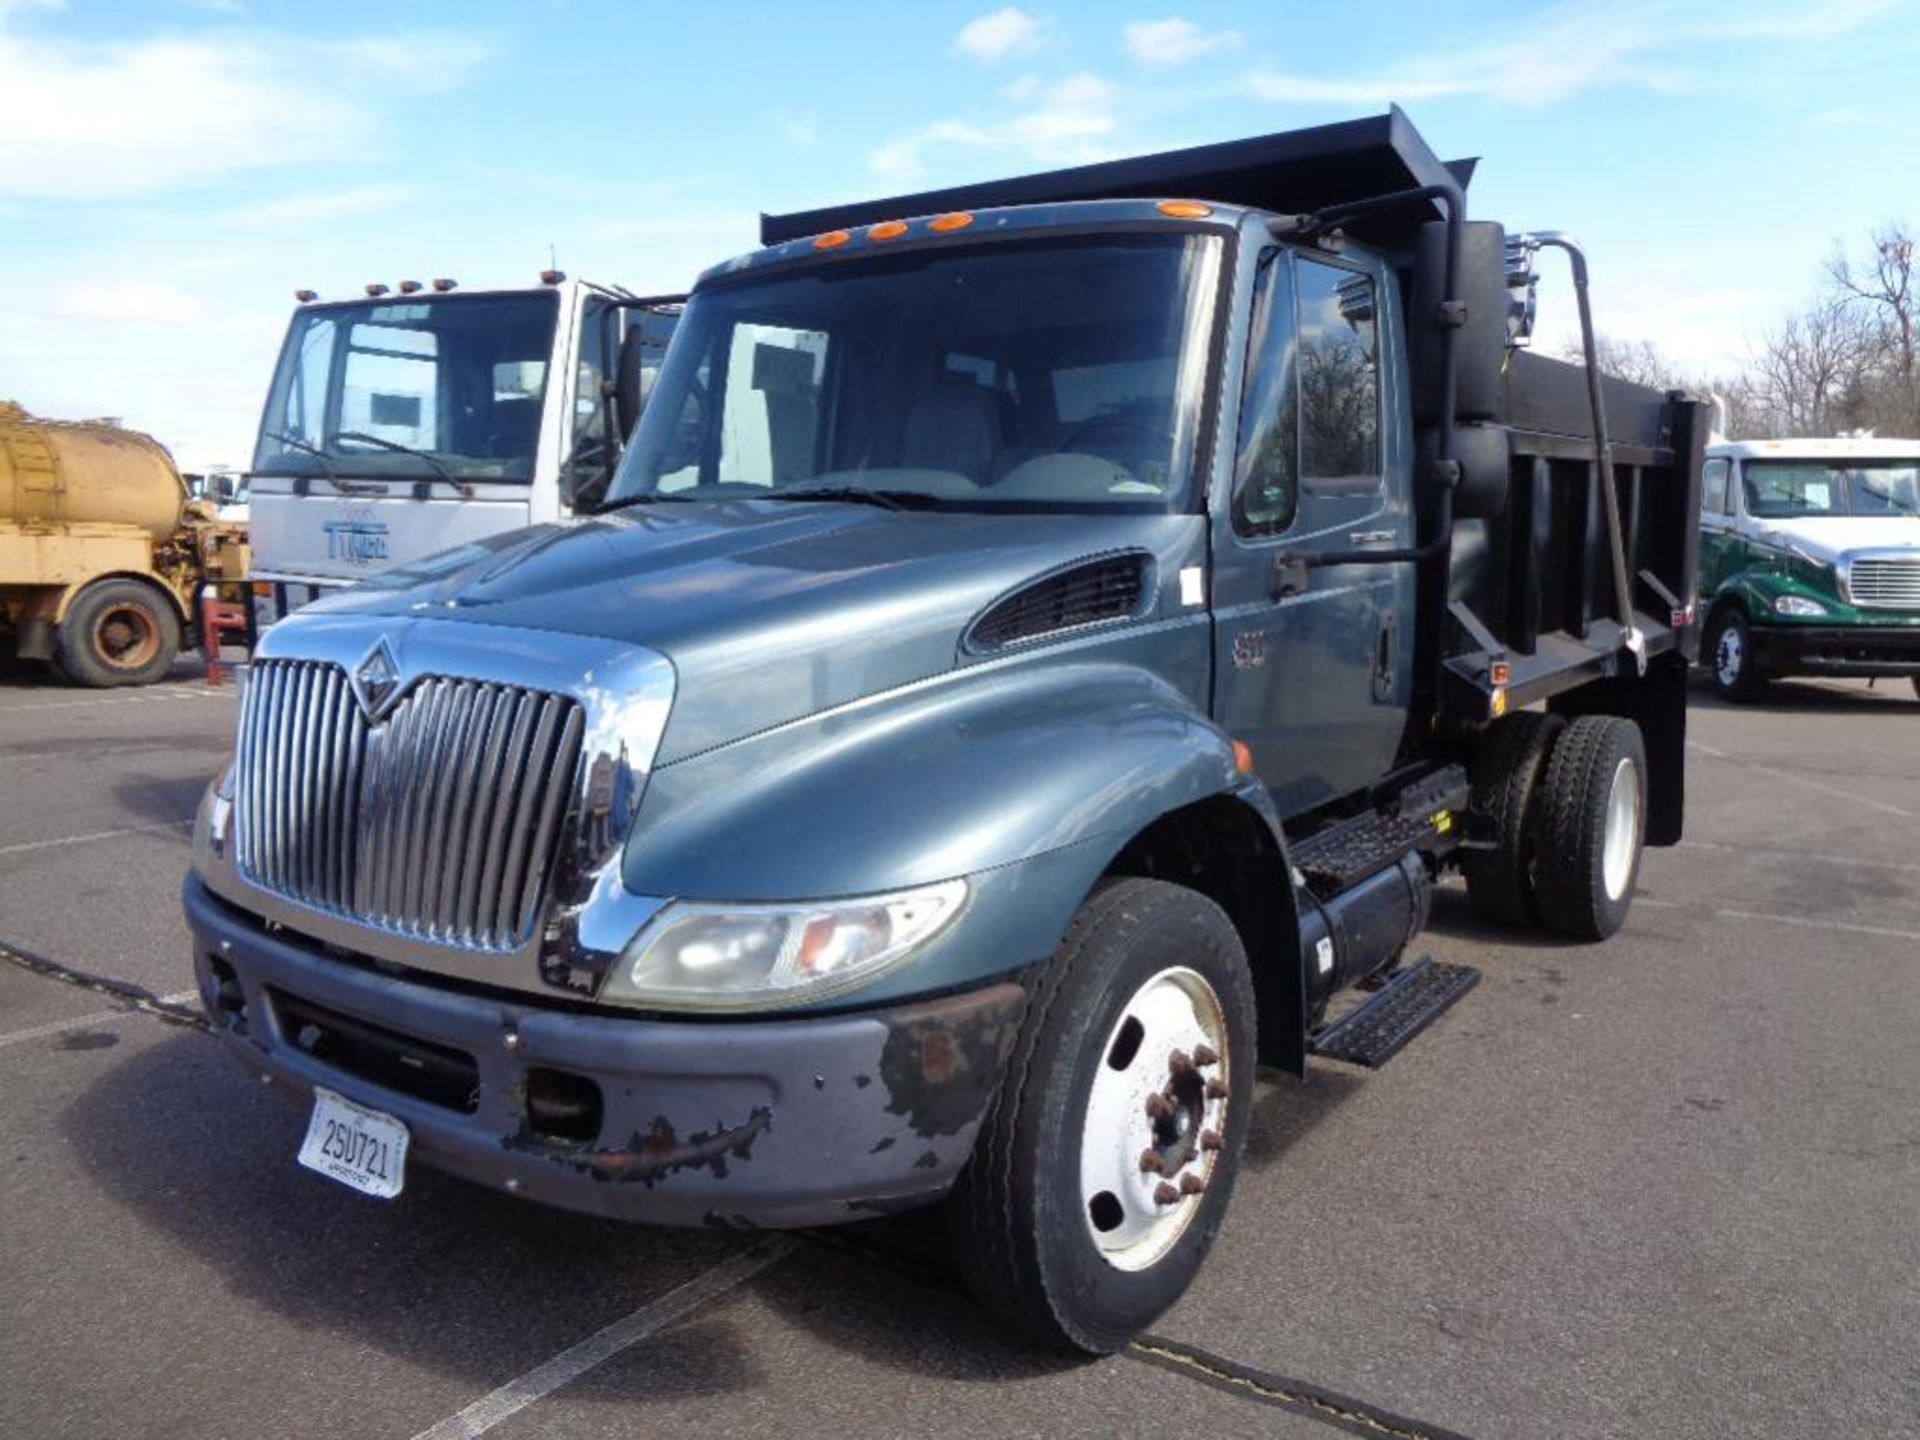 2006 IHC 4300 s/a Dump Truck s/n 1htmmaam07h453143, dt466 eng, auto trans, od reads 76237 miles, new